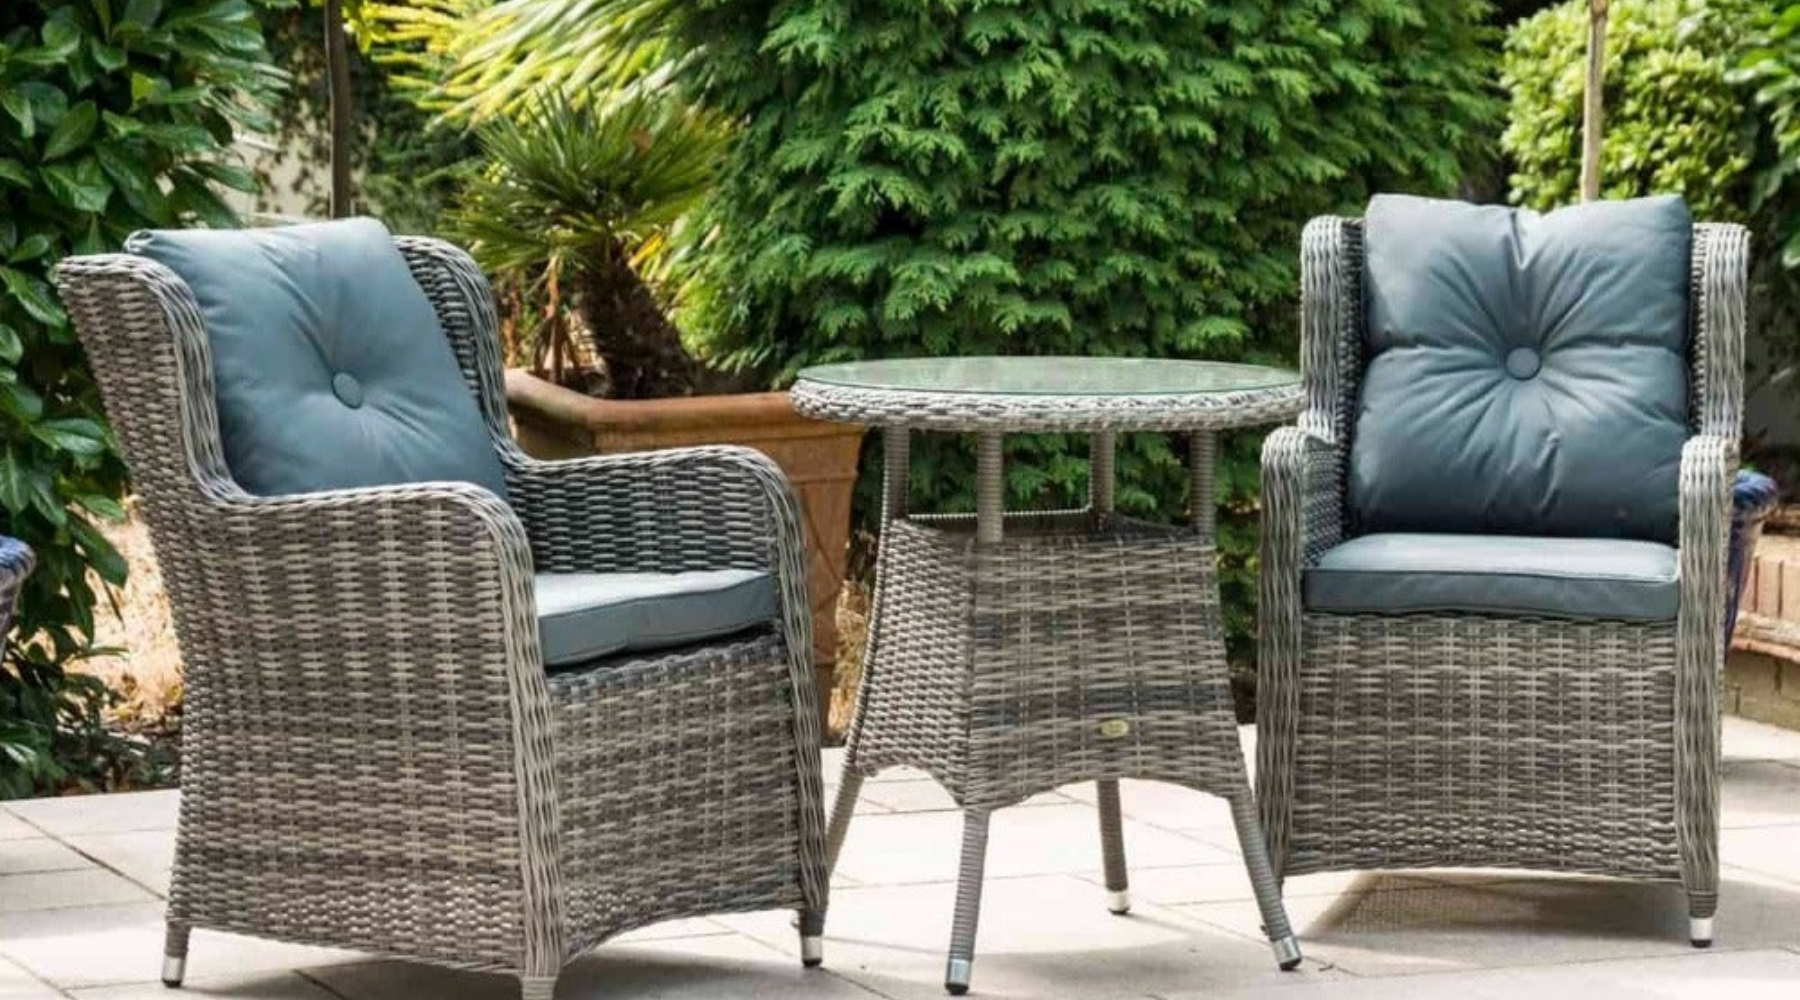 Why NOW is the Right Time to Buy Your Garden Furniture